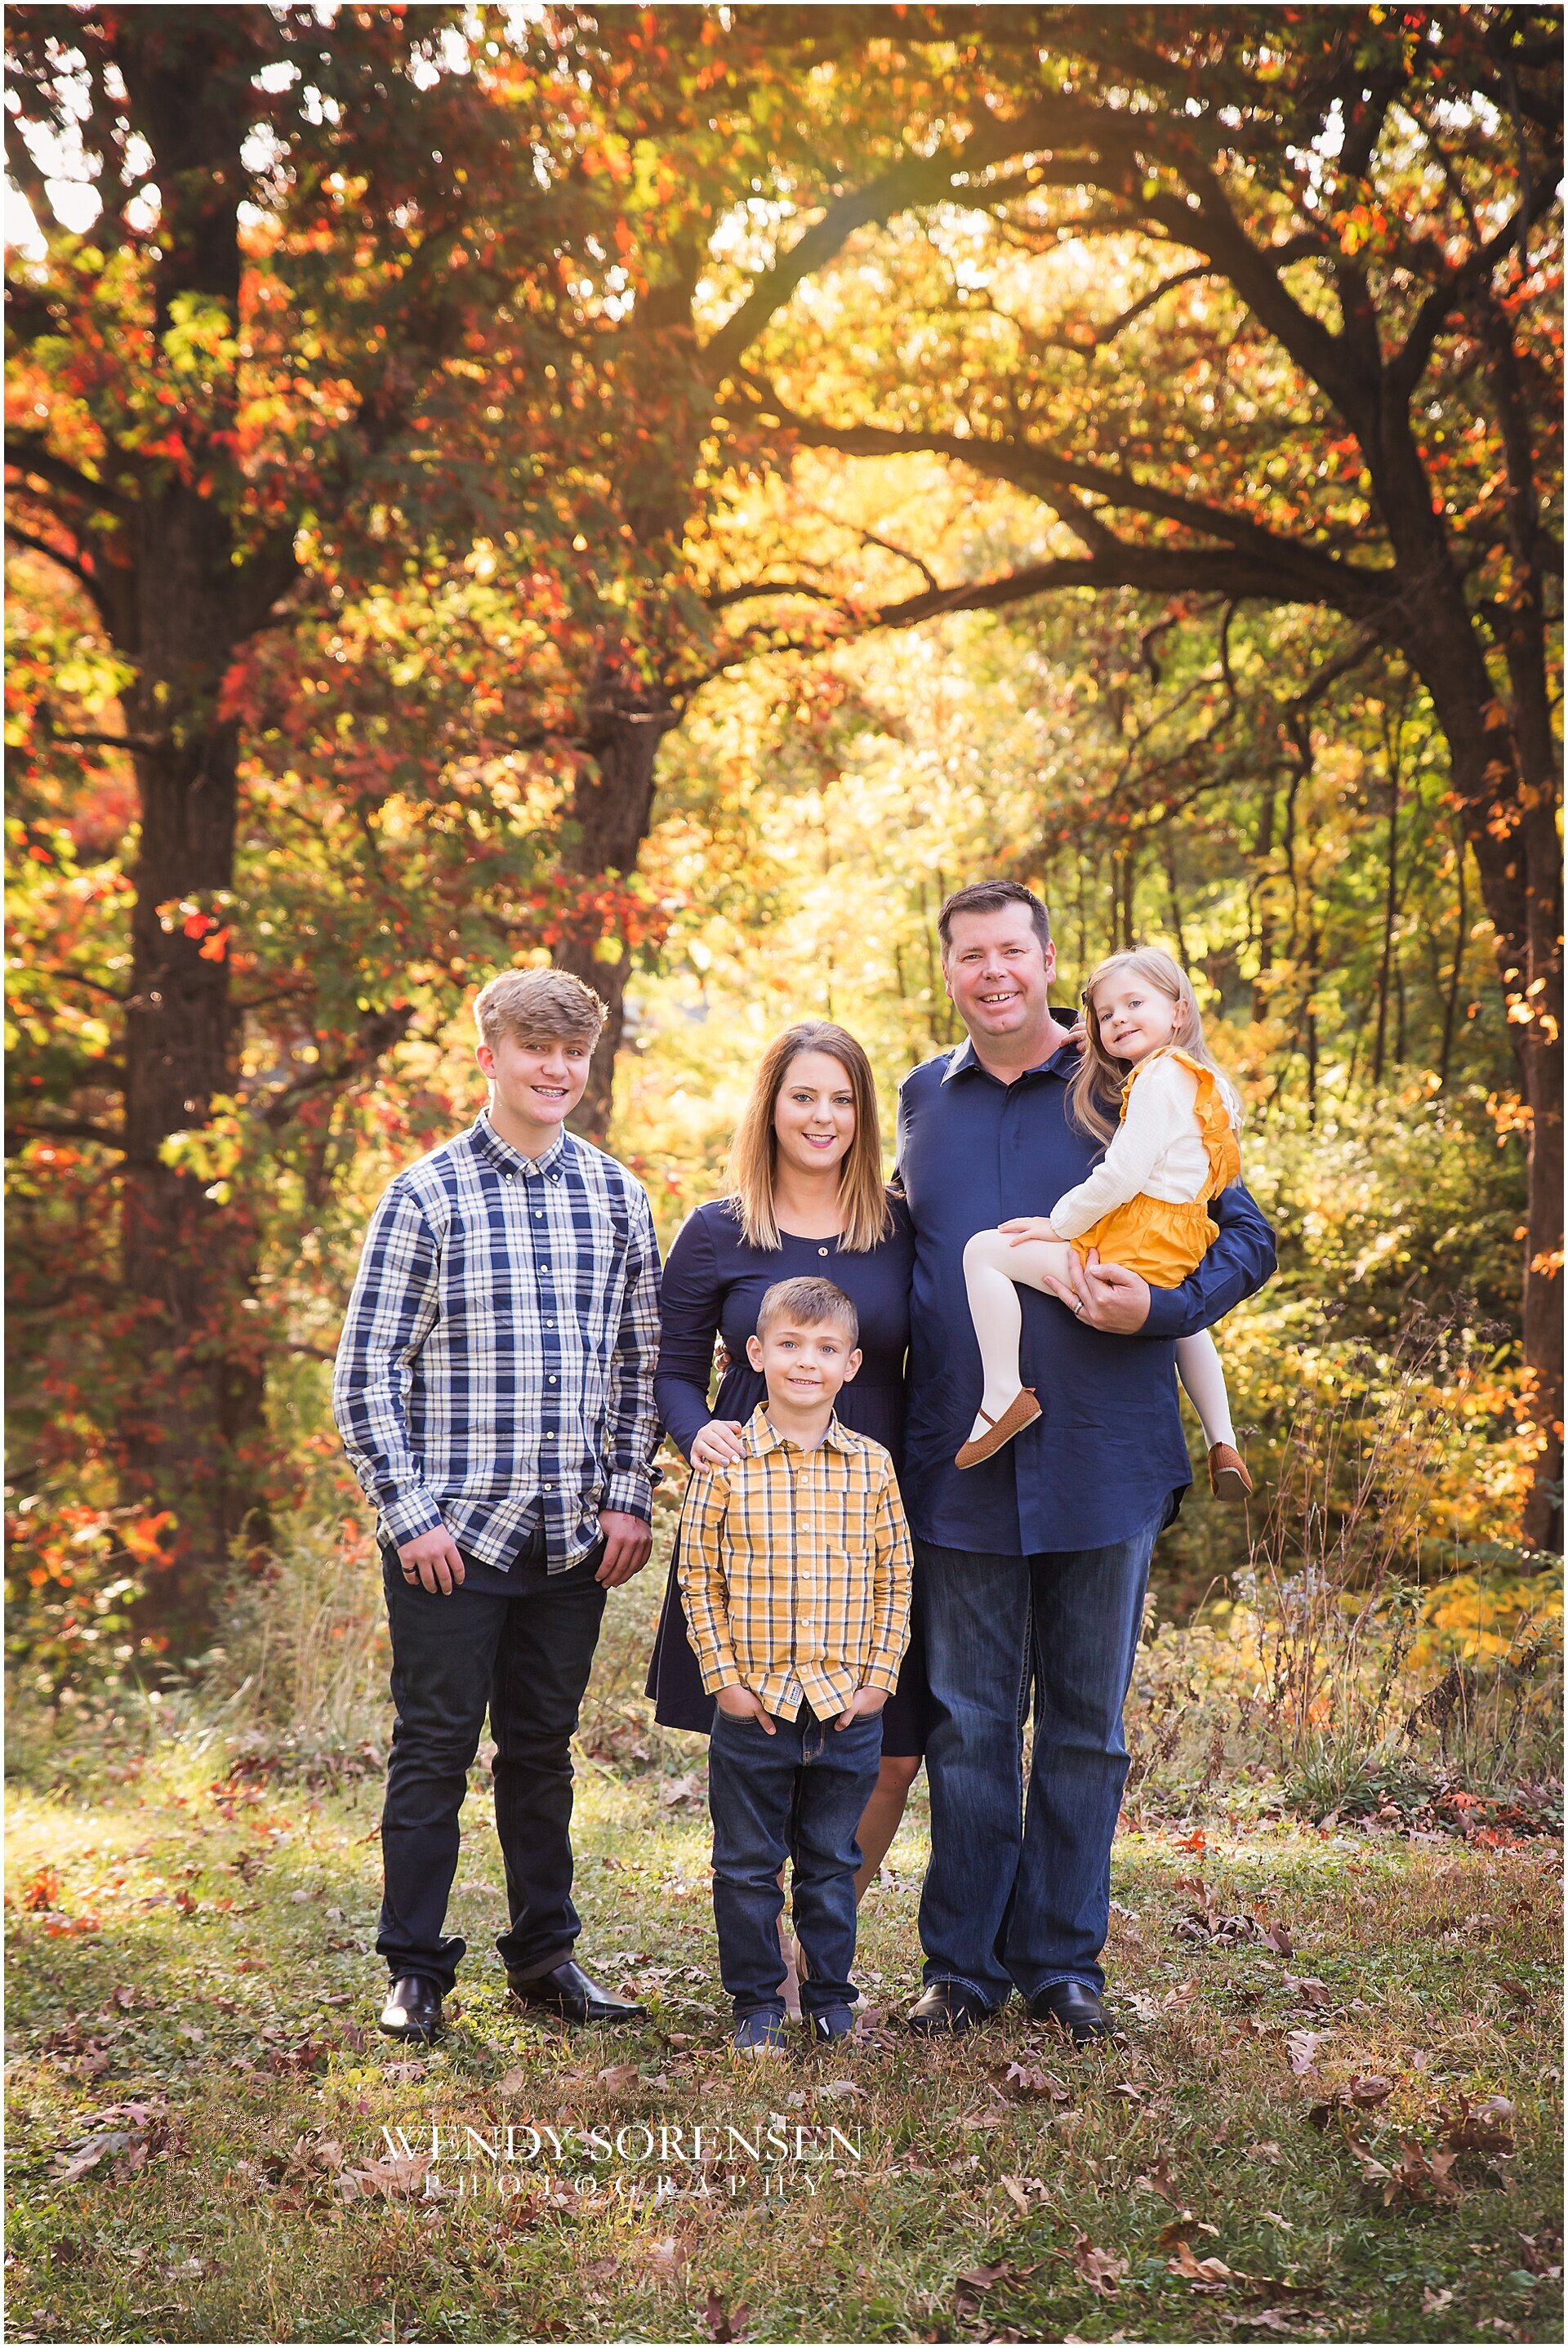 Fall Family Photos At Greenwood Park In